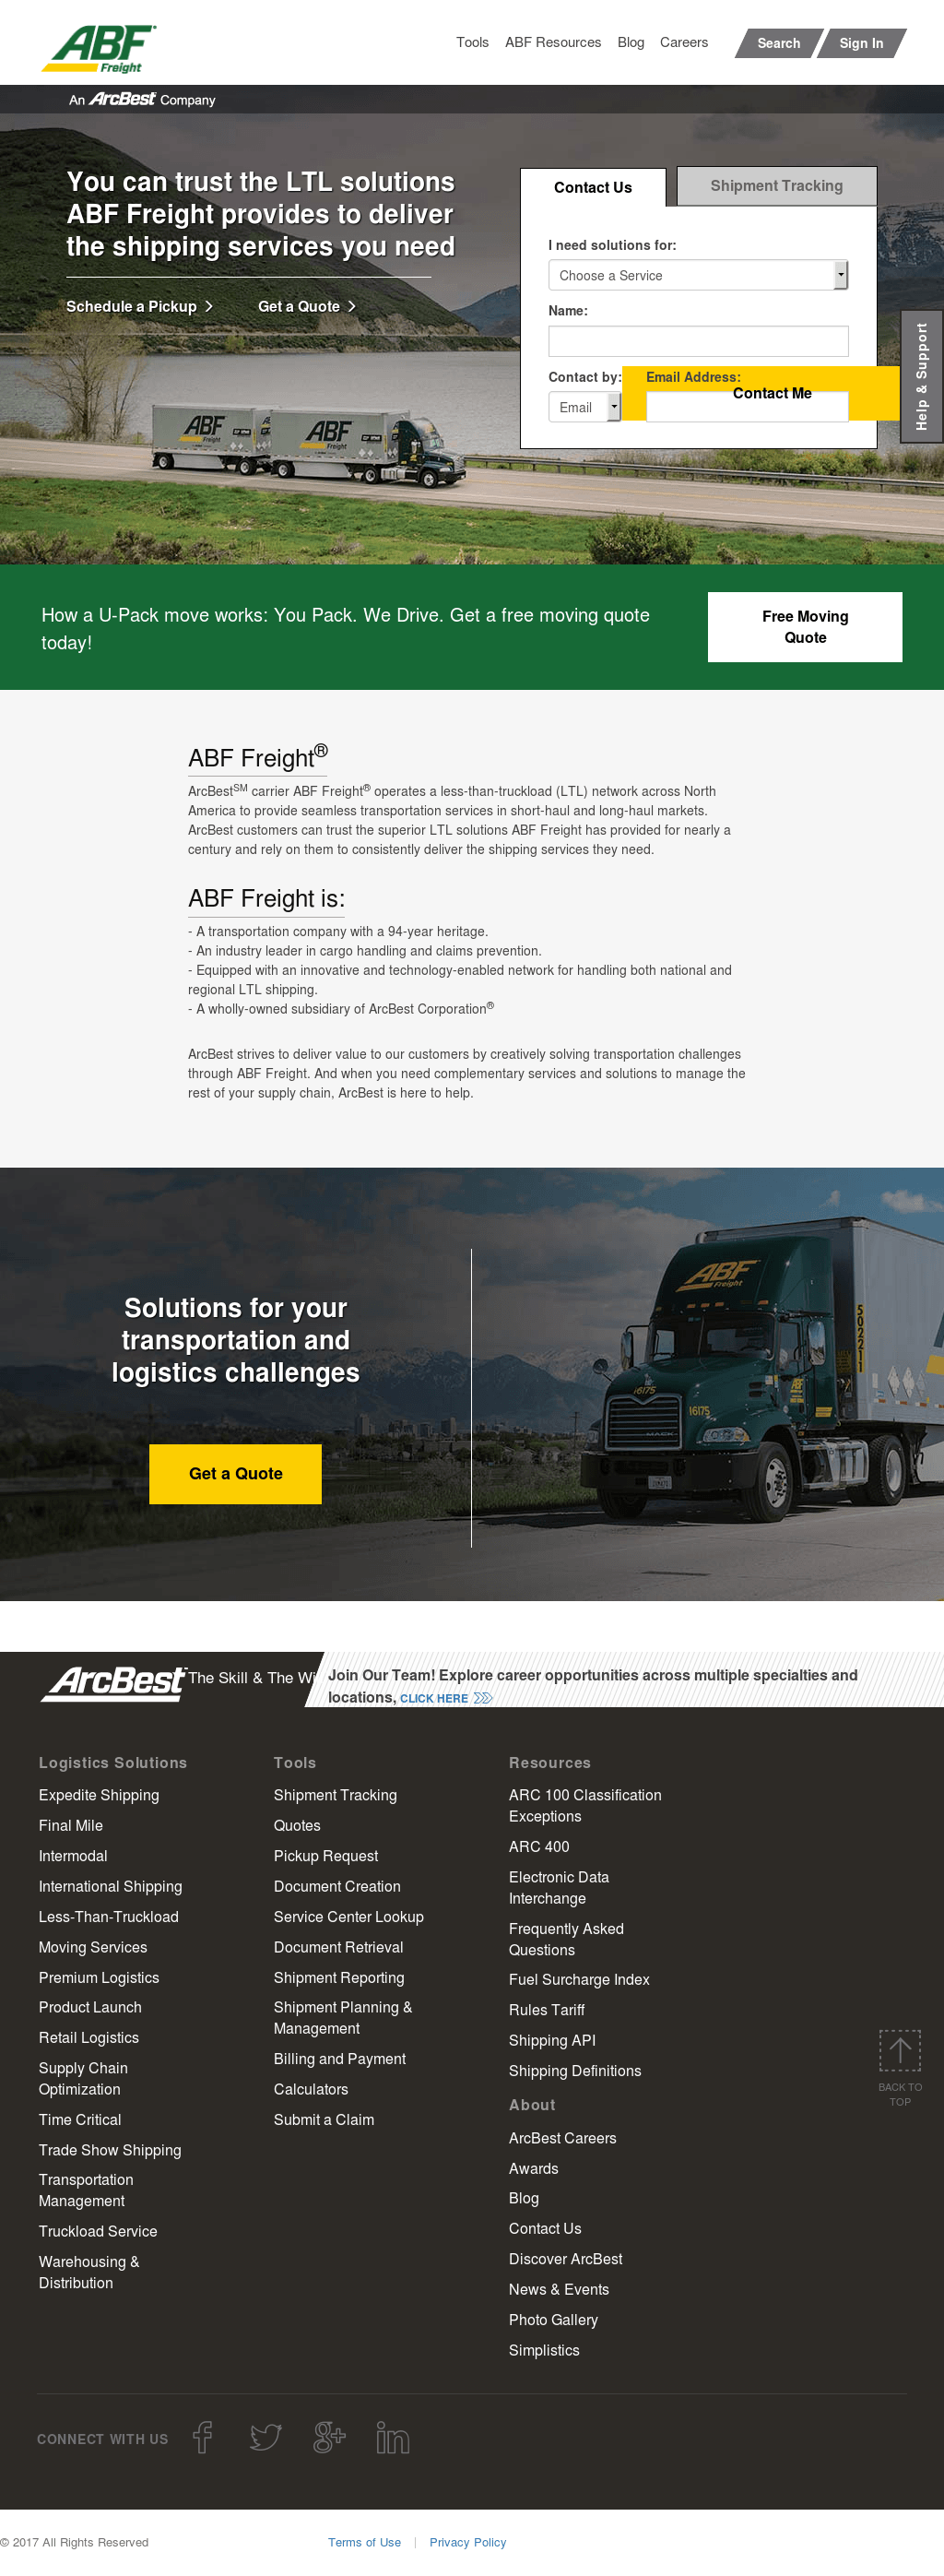 ABF Freight Logo - ABF Freight System Competitors, Revenue and Employees